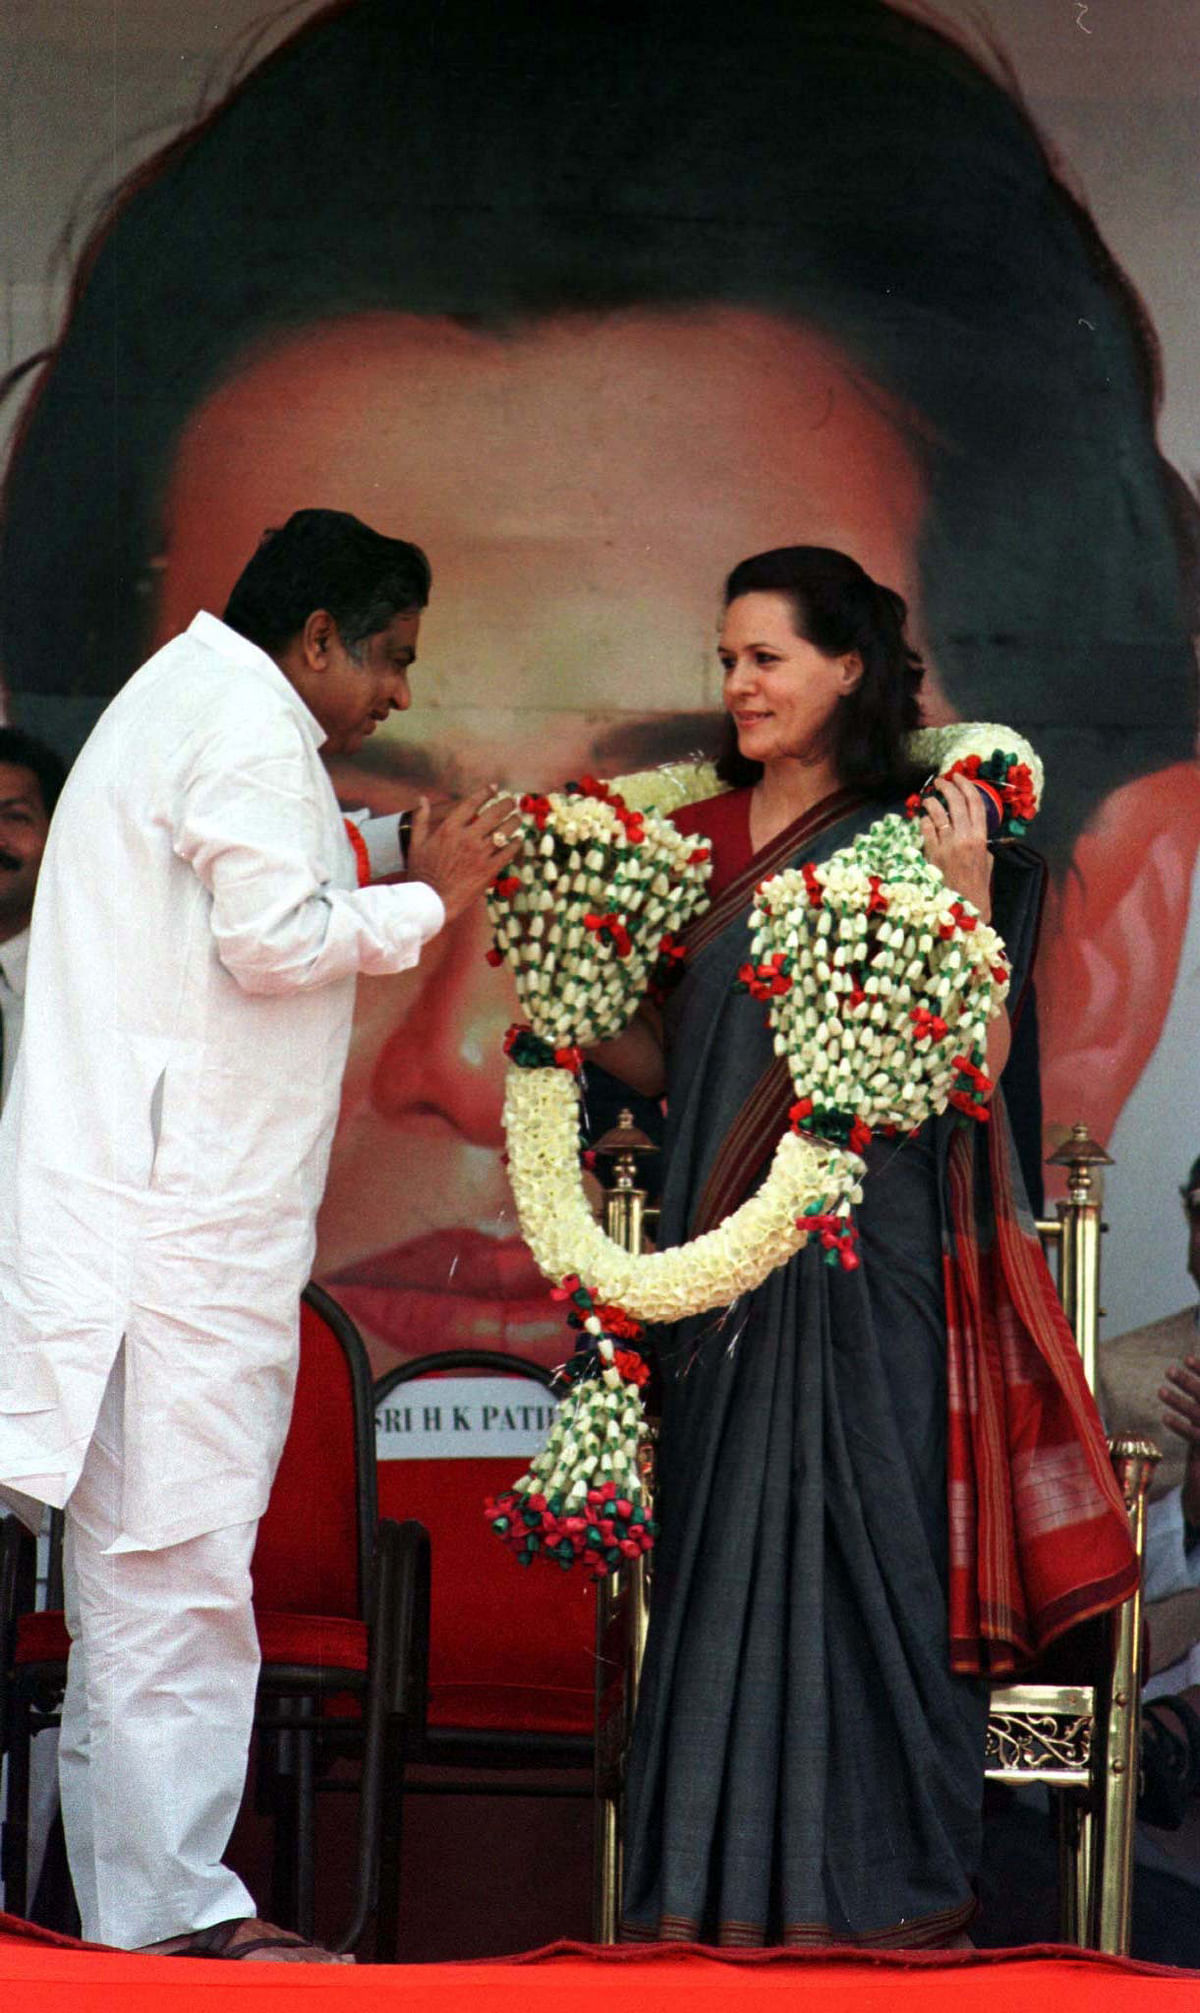 On her birthday, a photo feature on Sonia Gandhi, the woman who changed the face of Indian politics.